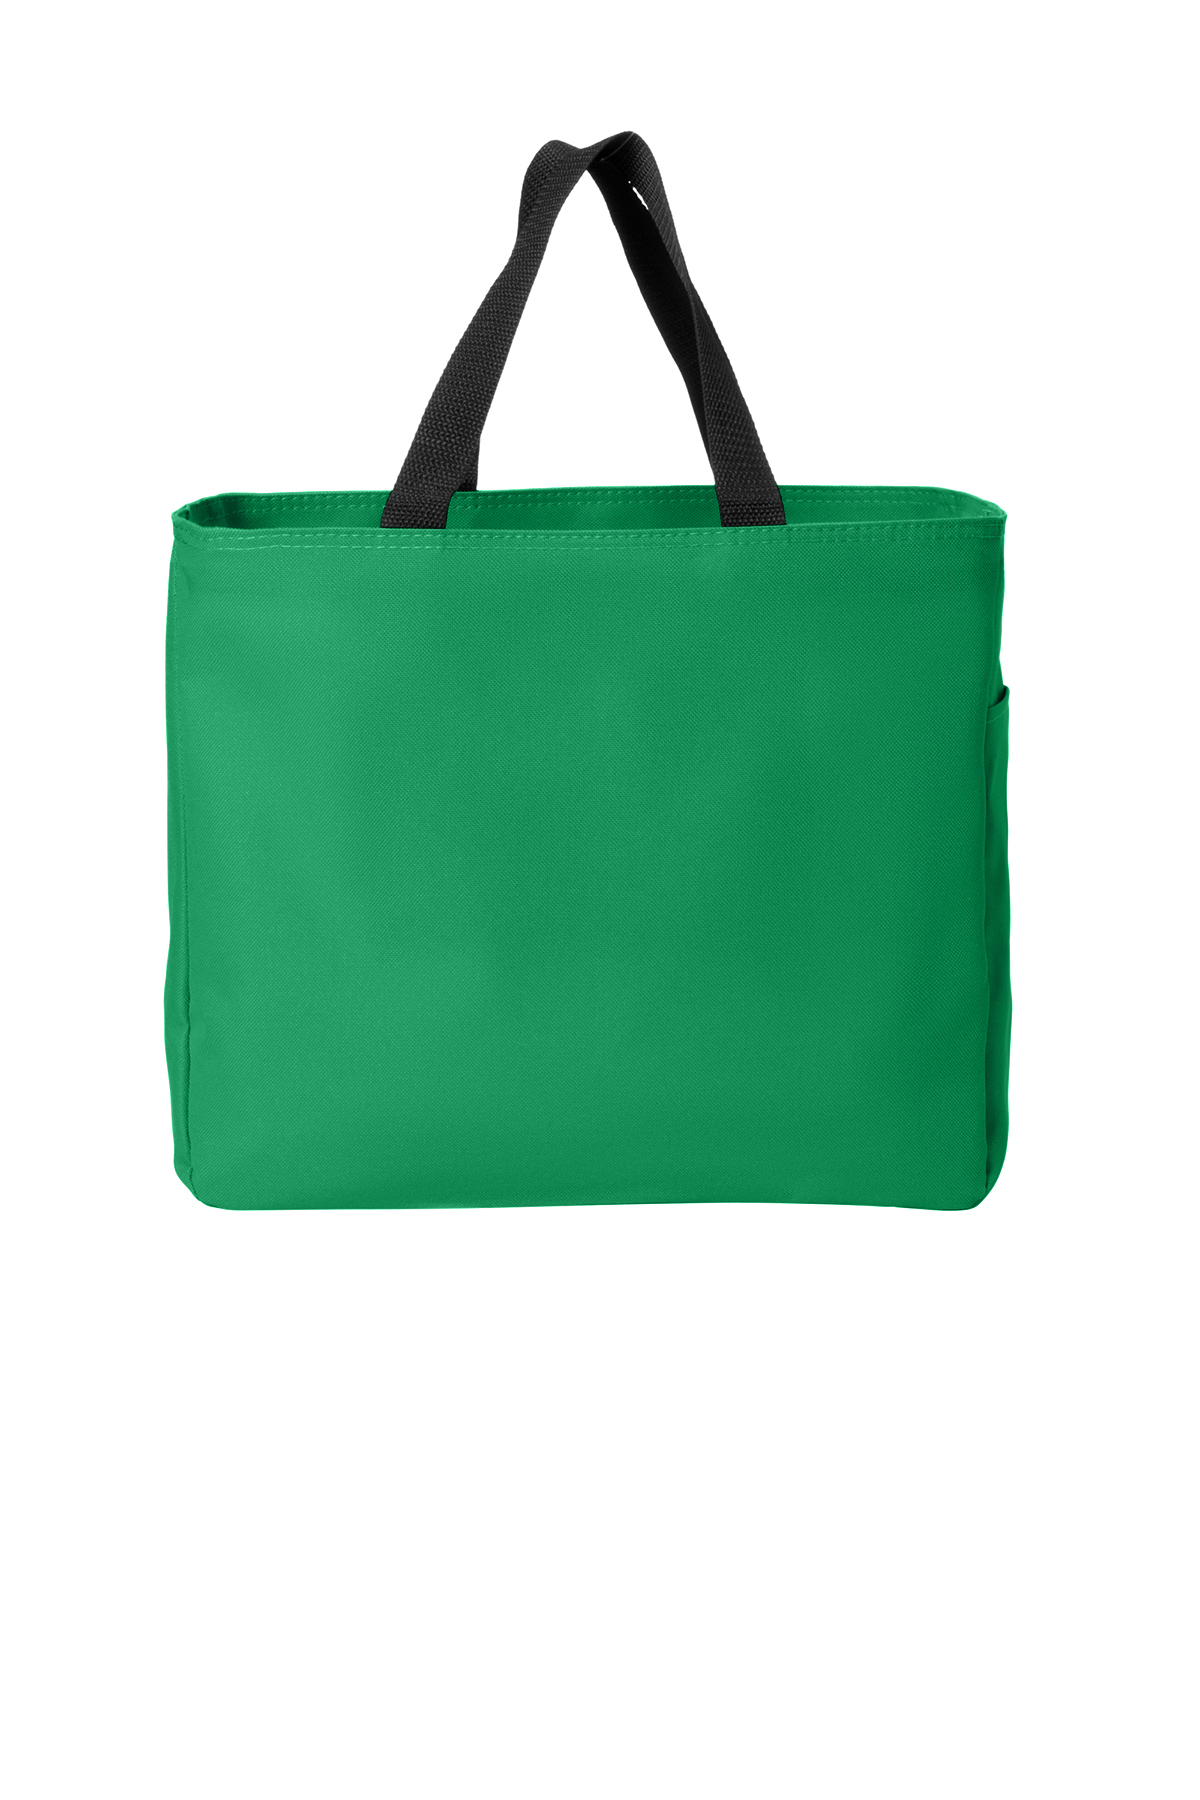 Port Authority - Essential Tote | Product | SanMar